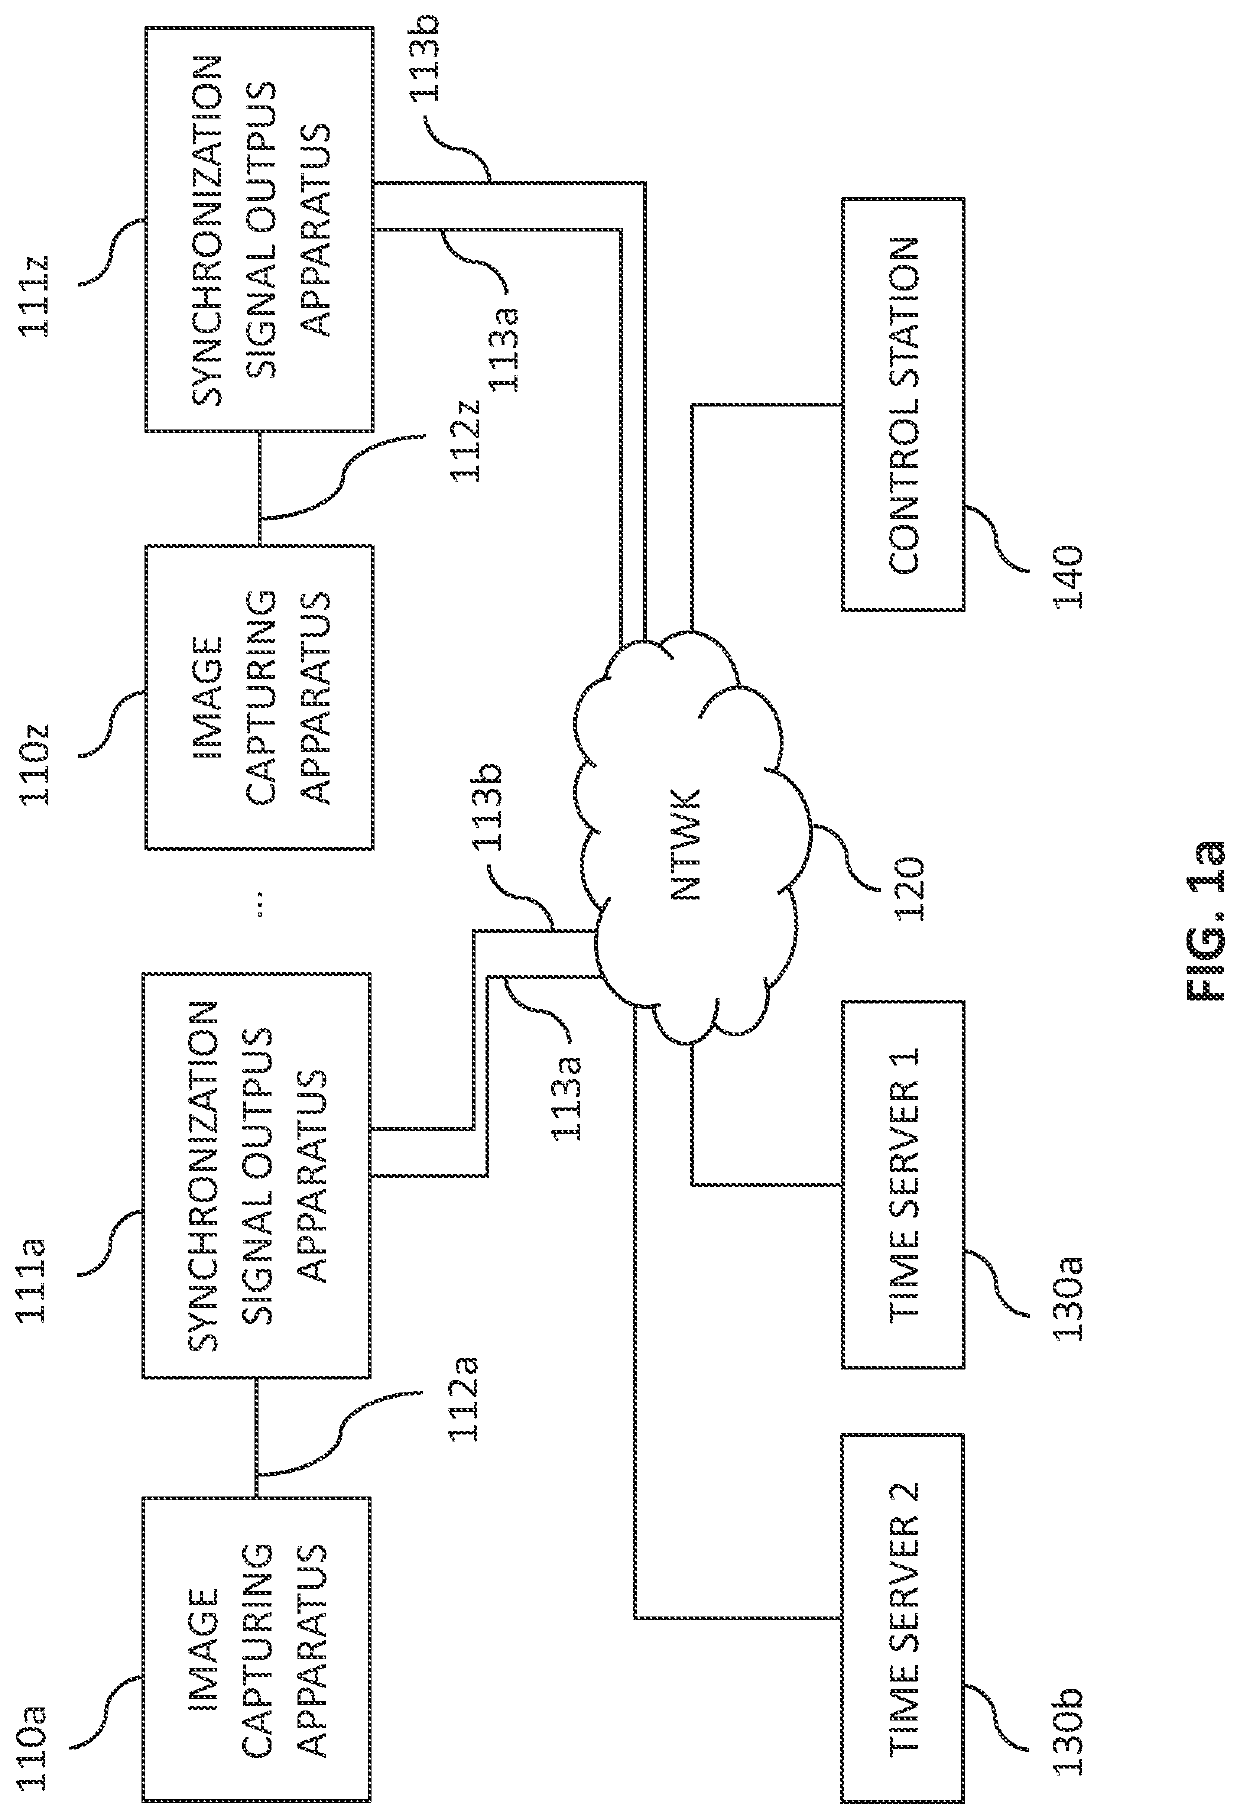 Method for generating control signals for an image capture device